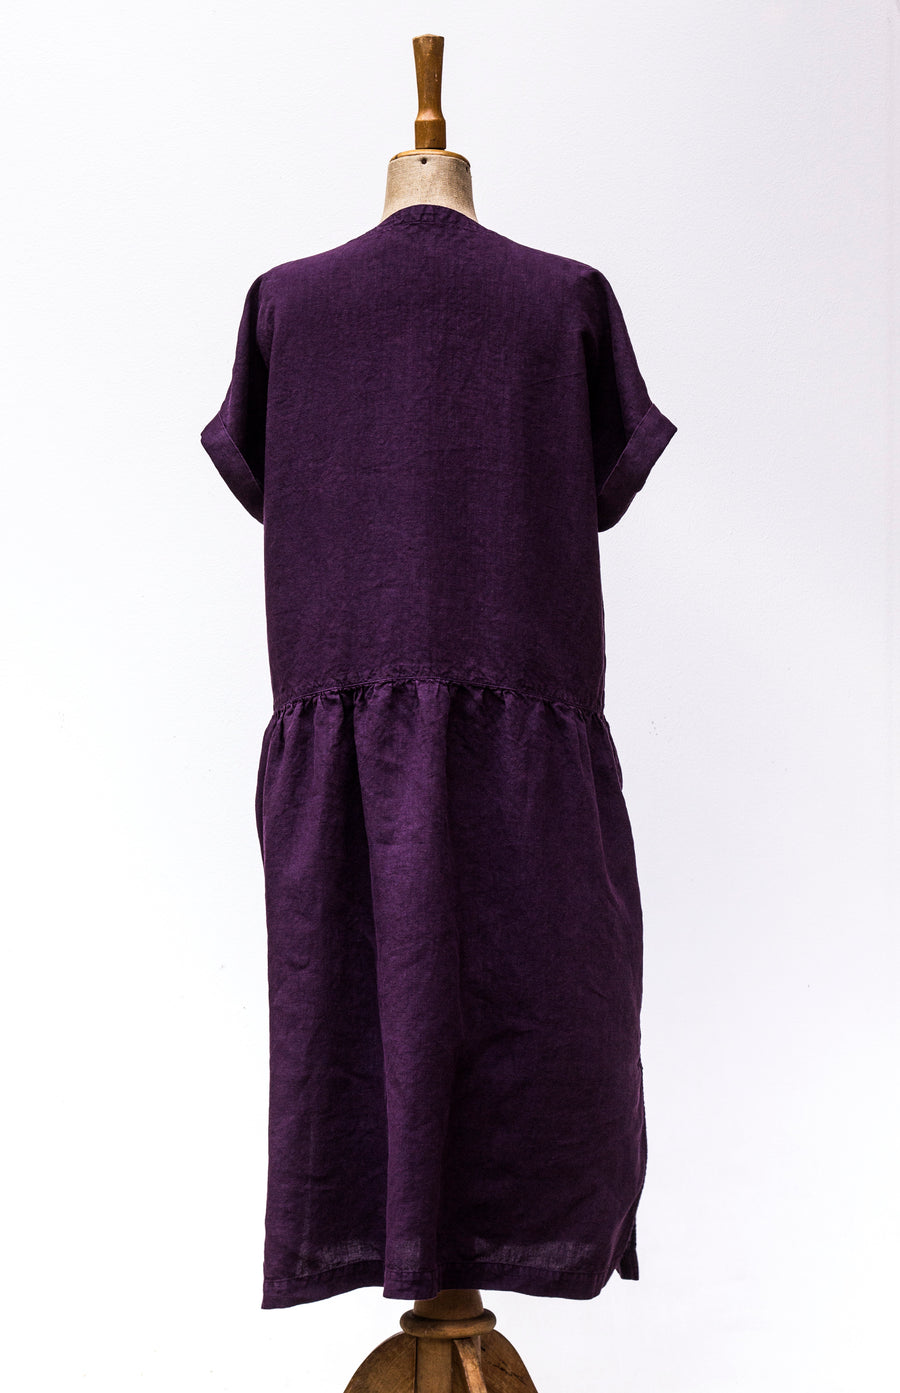 Autumn country dress in Shadow Purple shade